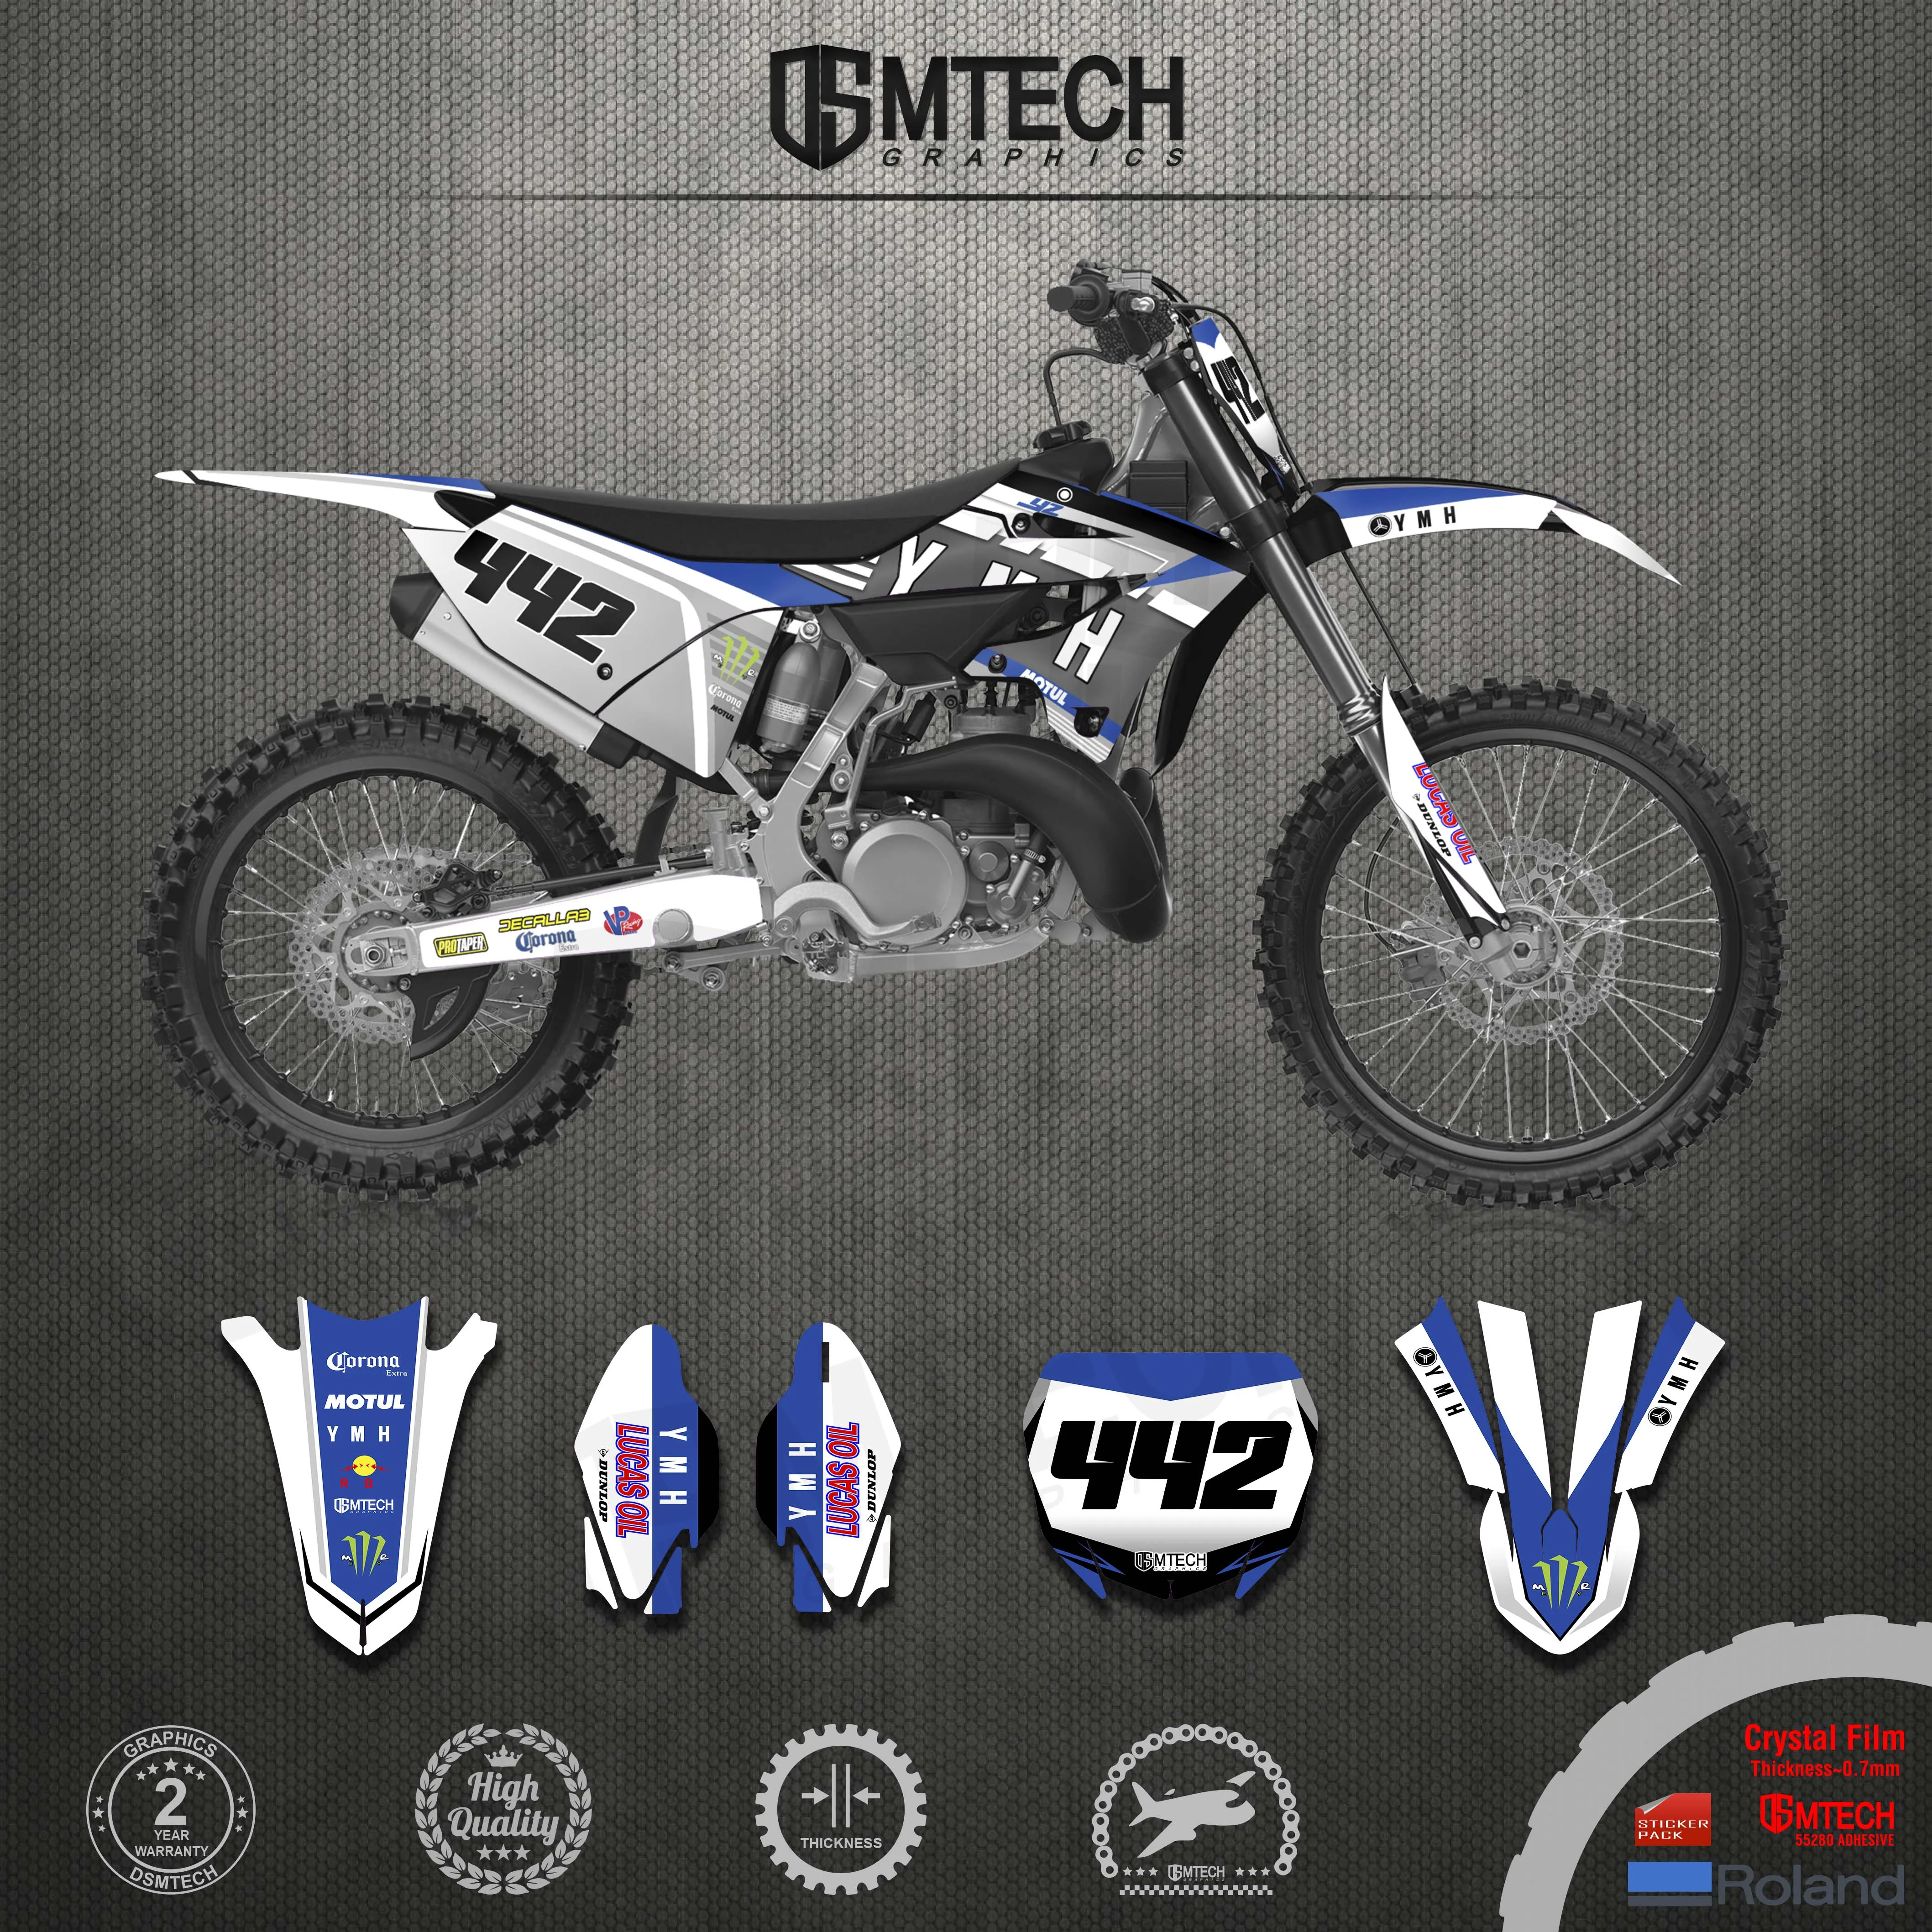 DSMTECH Motorcycle Team Backgrounds Graphics Stickers Decals Kits For YAMAHA 2022 YZ 125 250  22 YZ 250 125